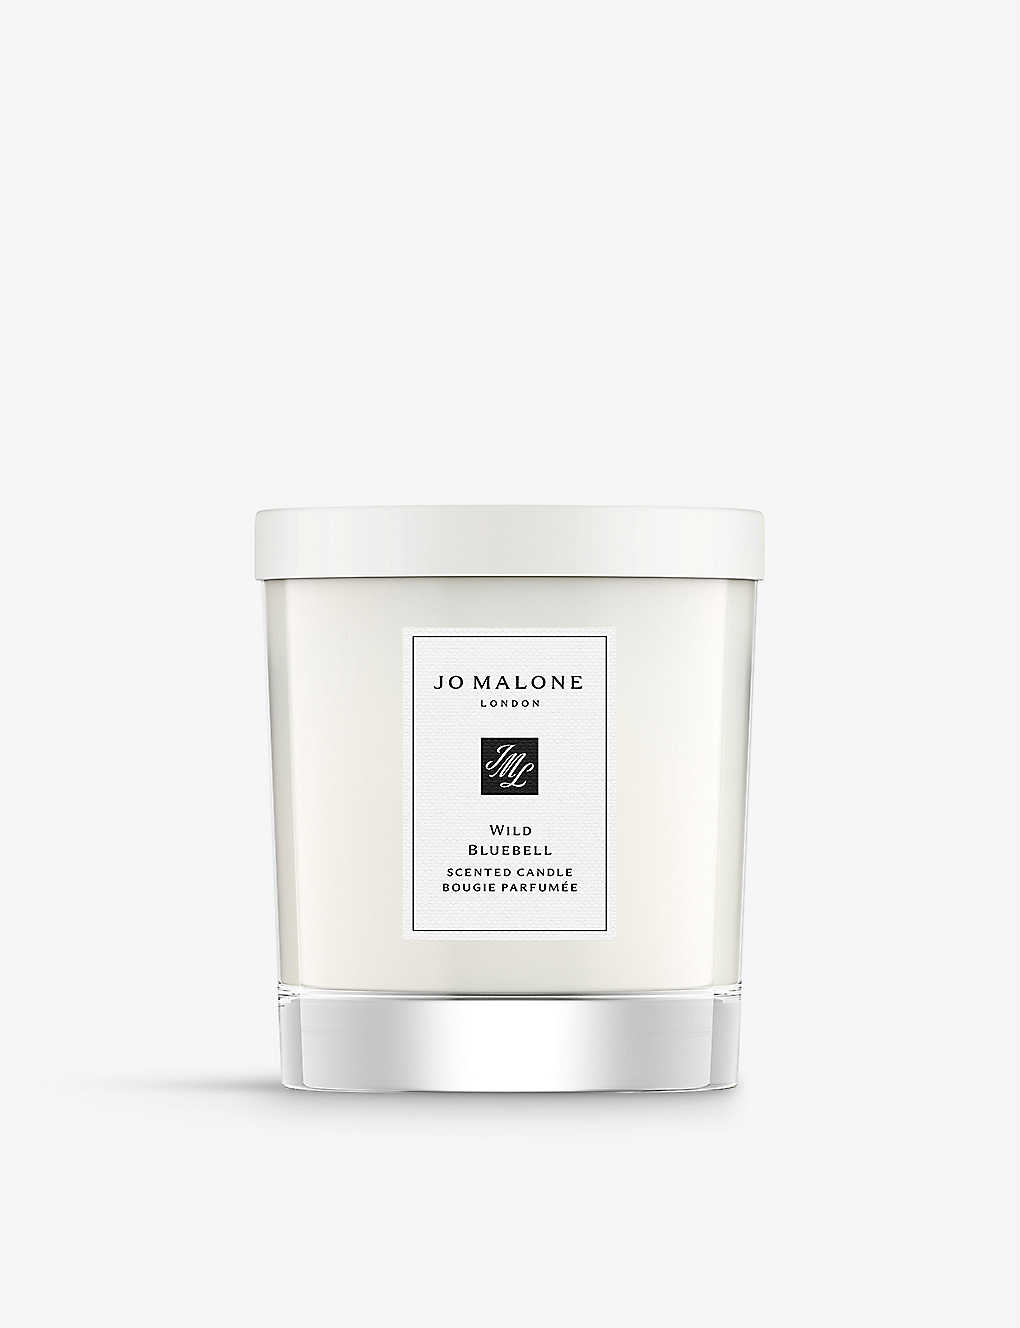 Jo Malone London Wild Bluebell Scented Candle 200g